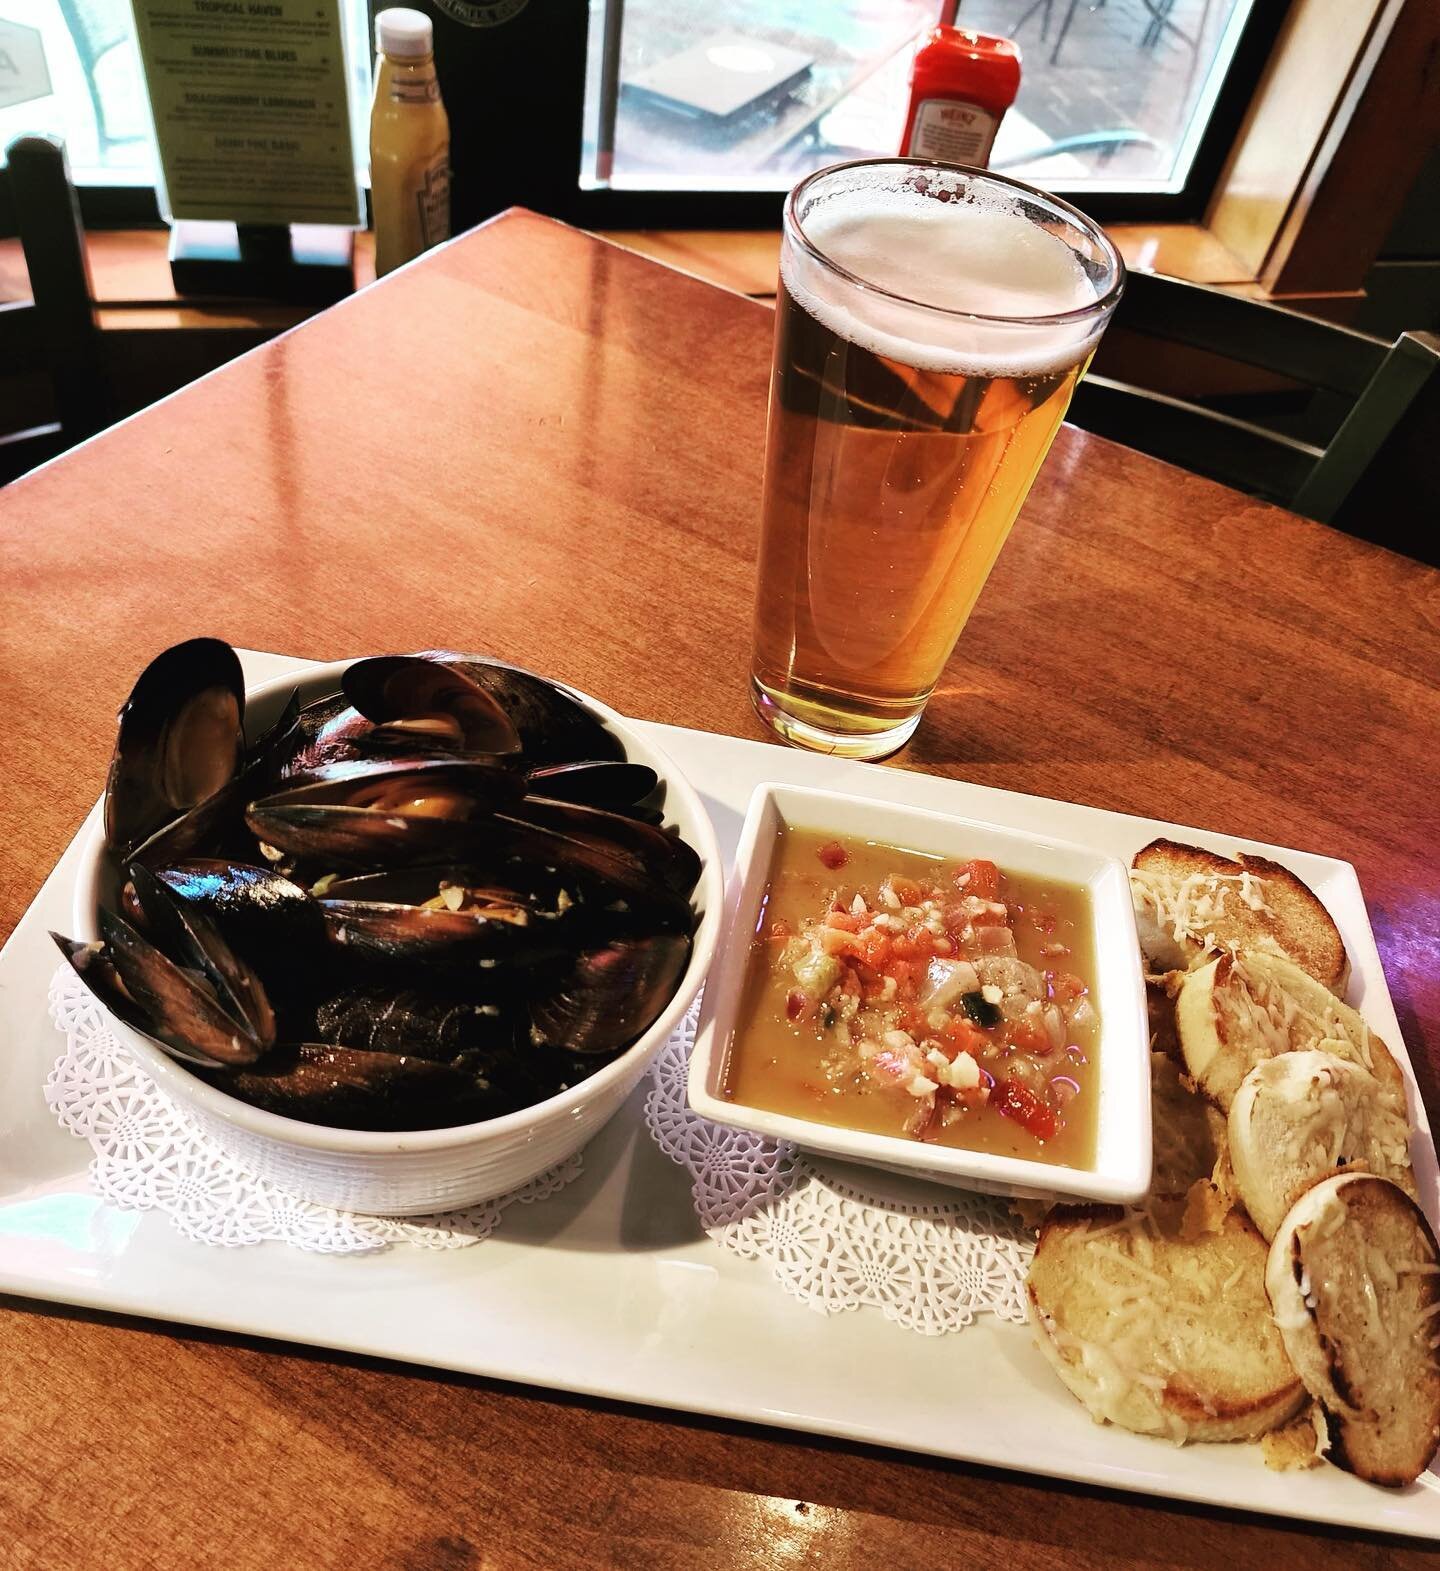 Get them while they last!!! We made a tomato, onion, and garlic bruschetta and saut&eacute;ed Green slipper Mussels for you this weekend! These are so good as a meal or to share as an appetizer.
.
.
.
#damnfinebar #eatlocal #cocktails #craftbeer #dri